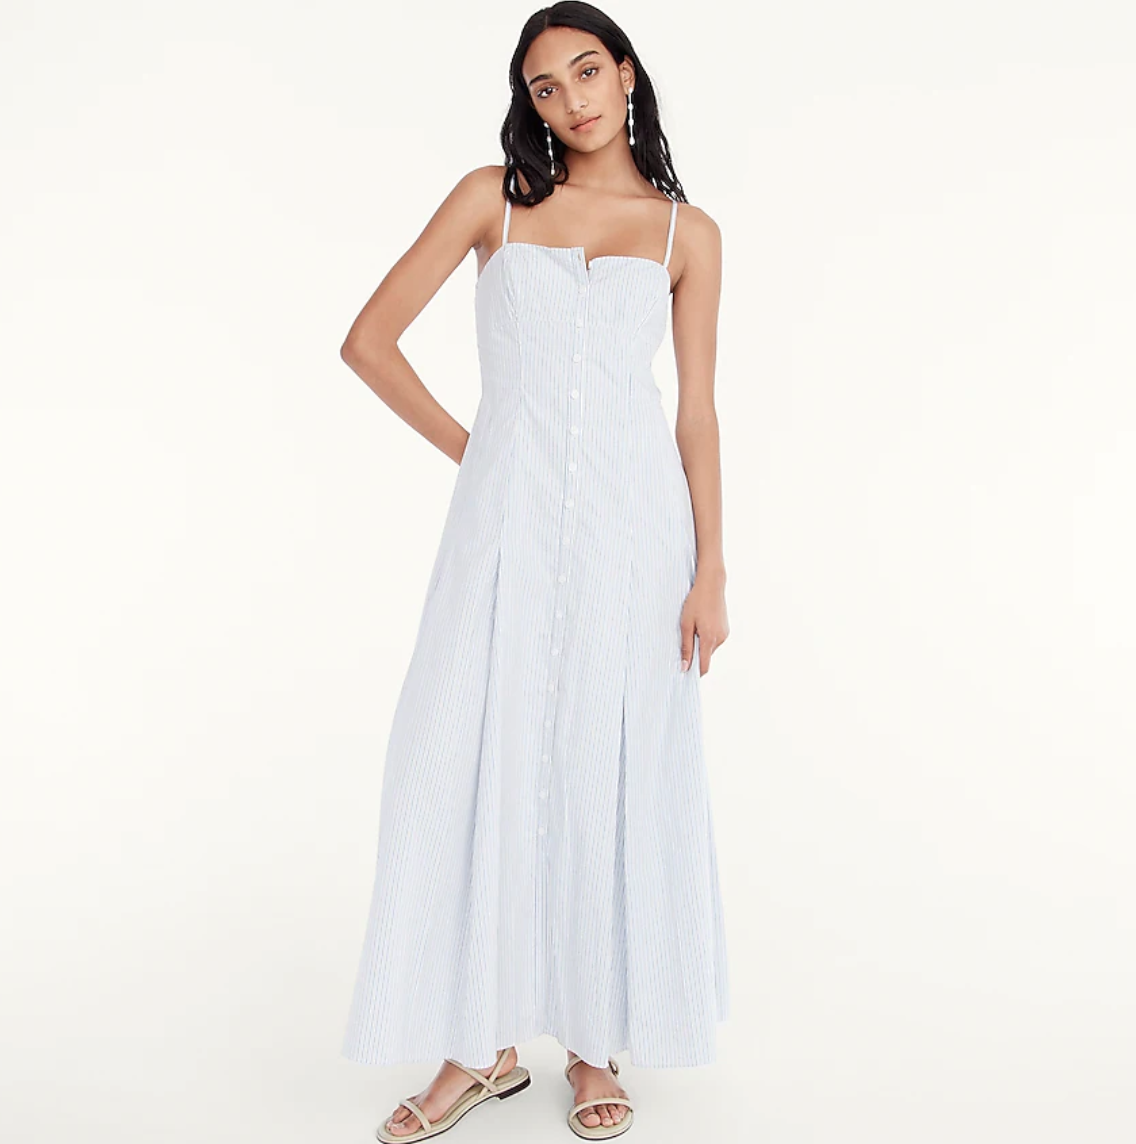 What to Wear to a Summer 2022 Wedding - 28 Stylish Summer Wedding Guest ...